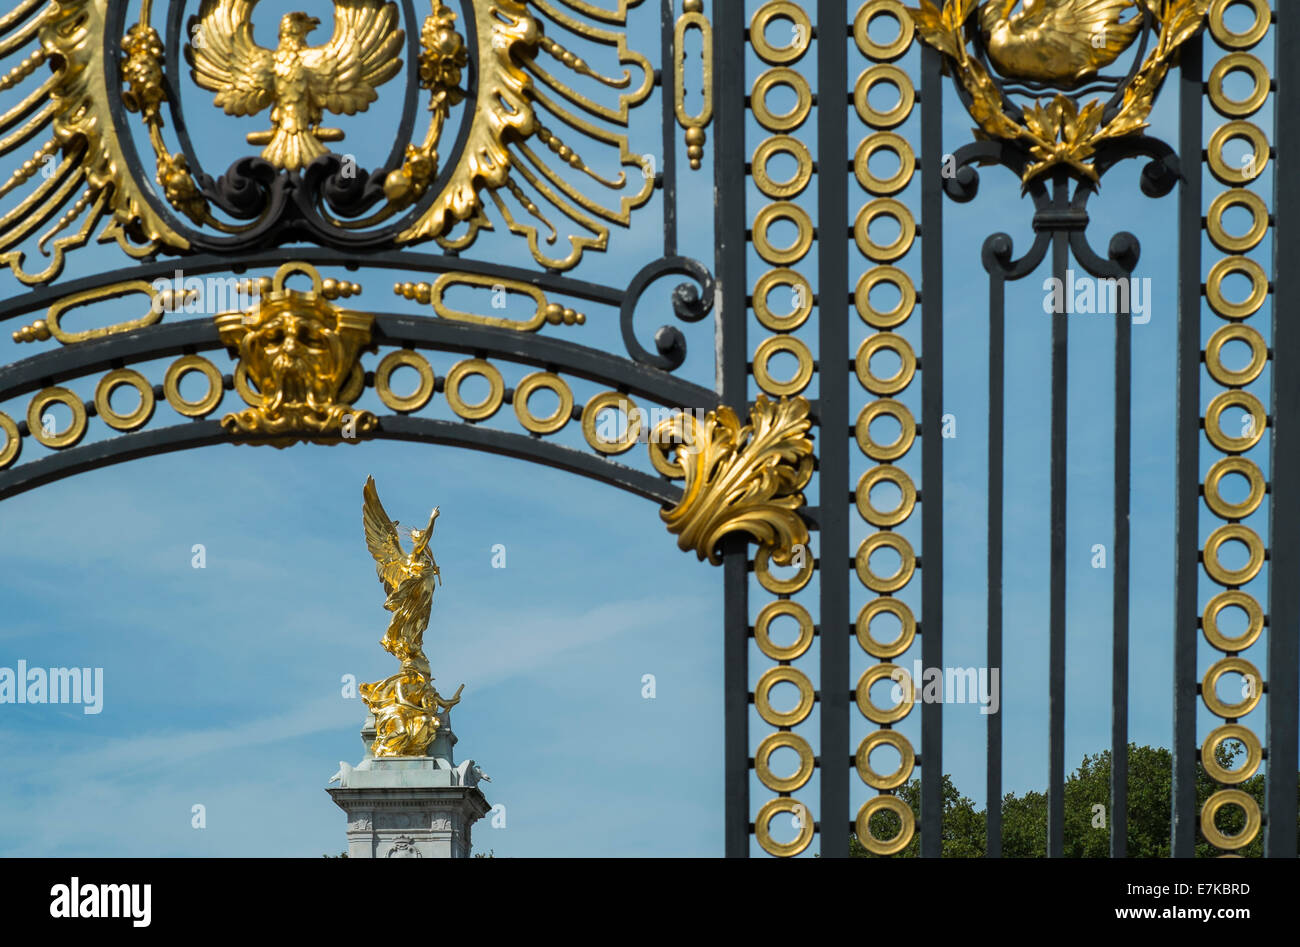 The Victoria Memorial seen through gates near Buckingham Palace on a summers day Stock Photo